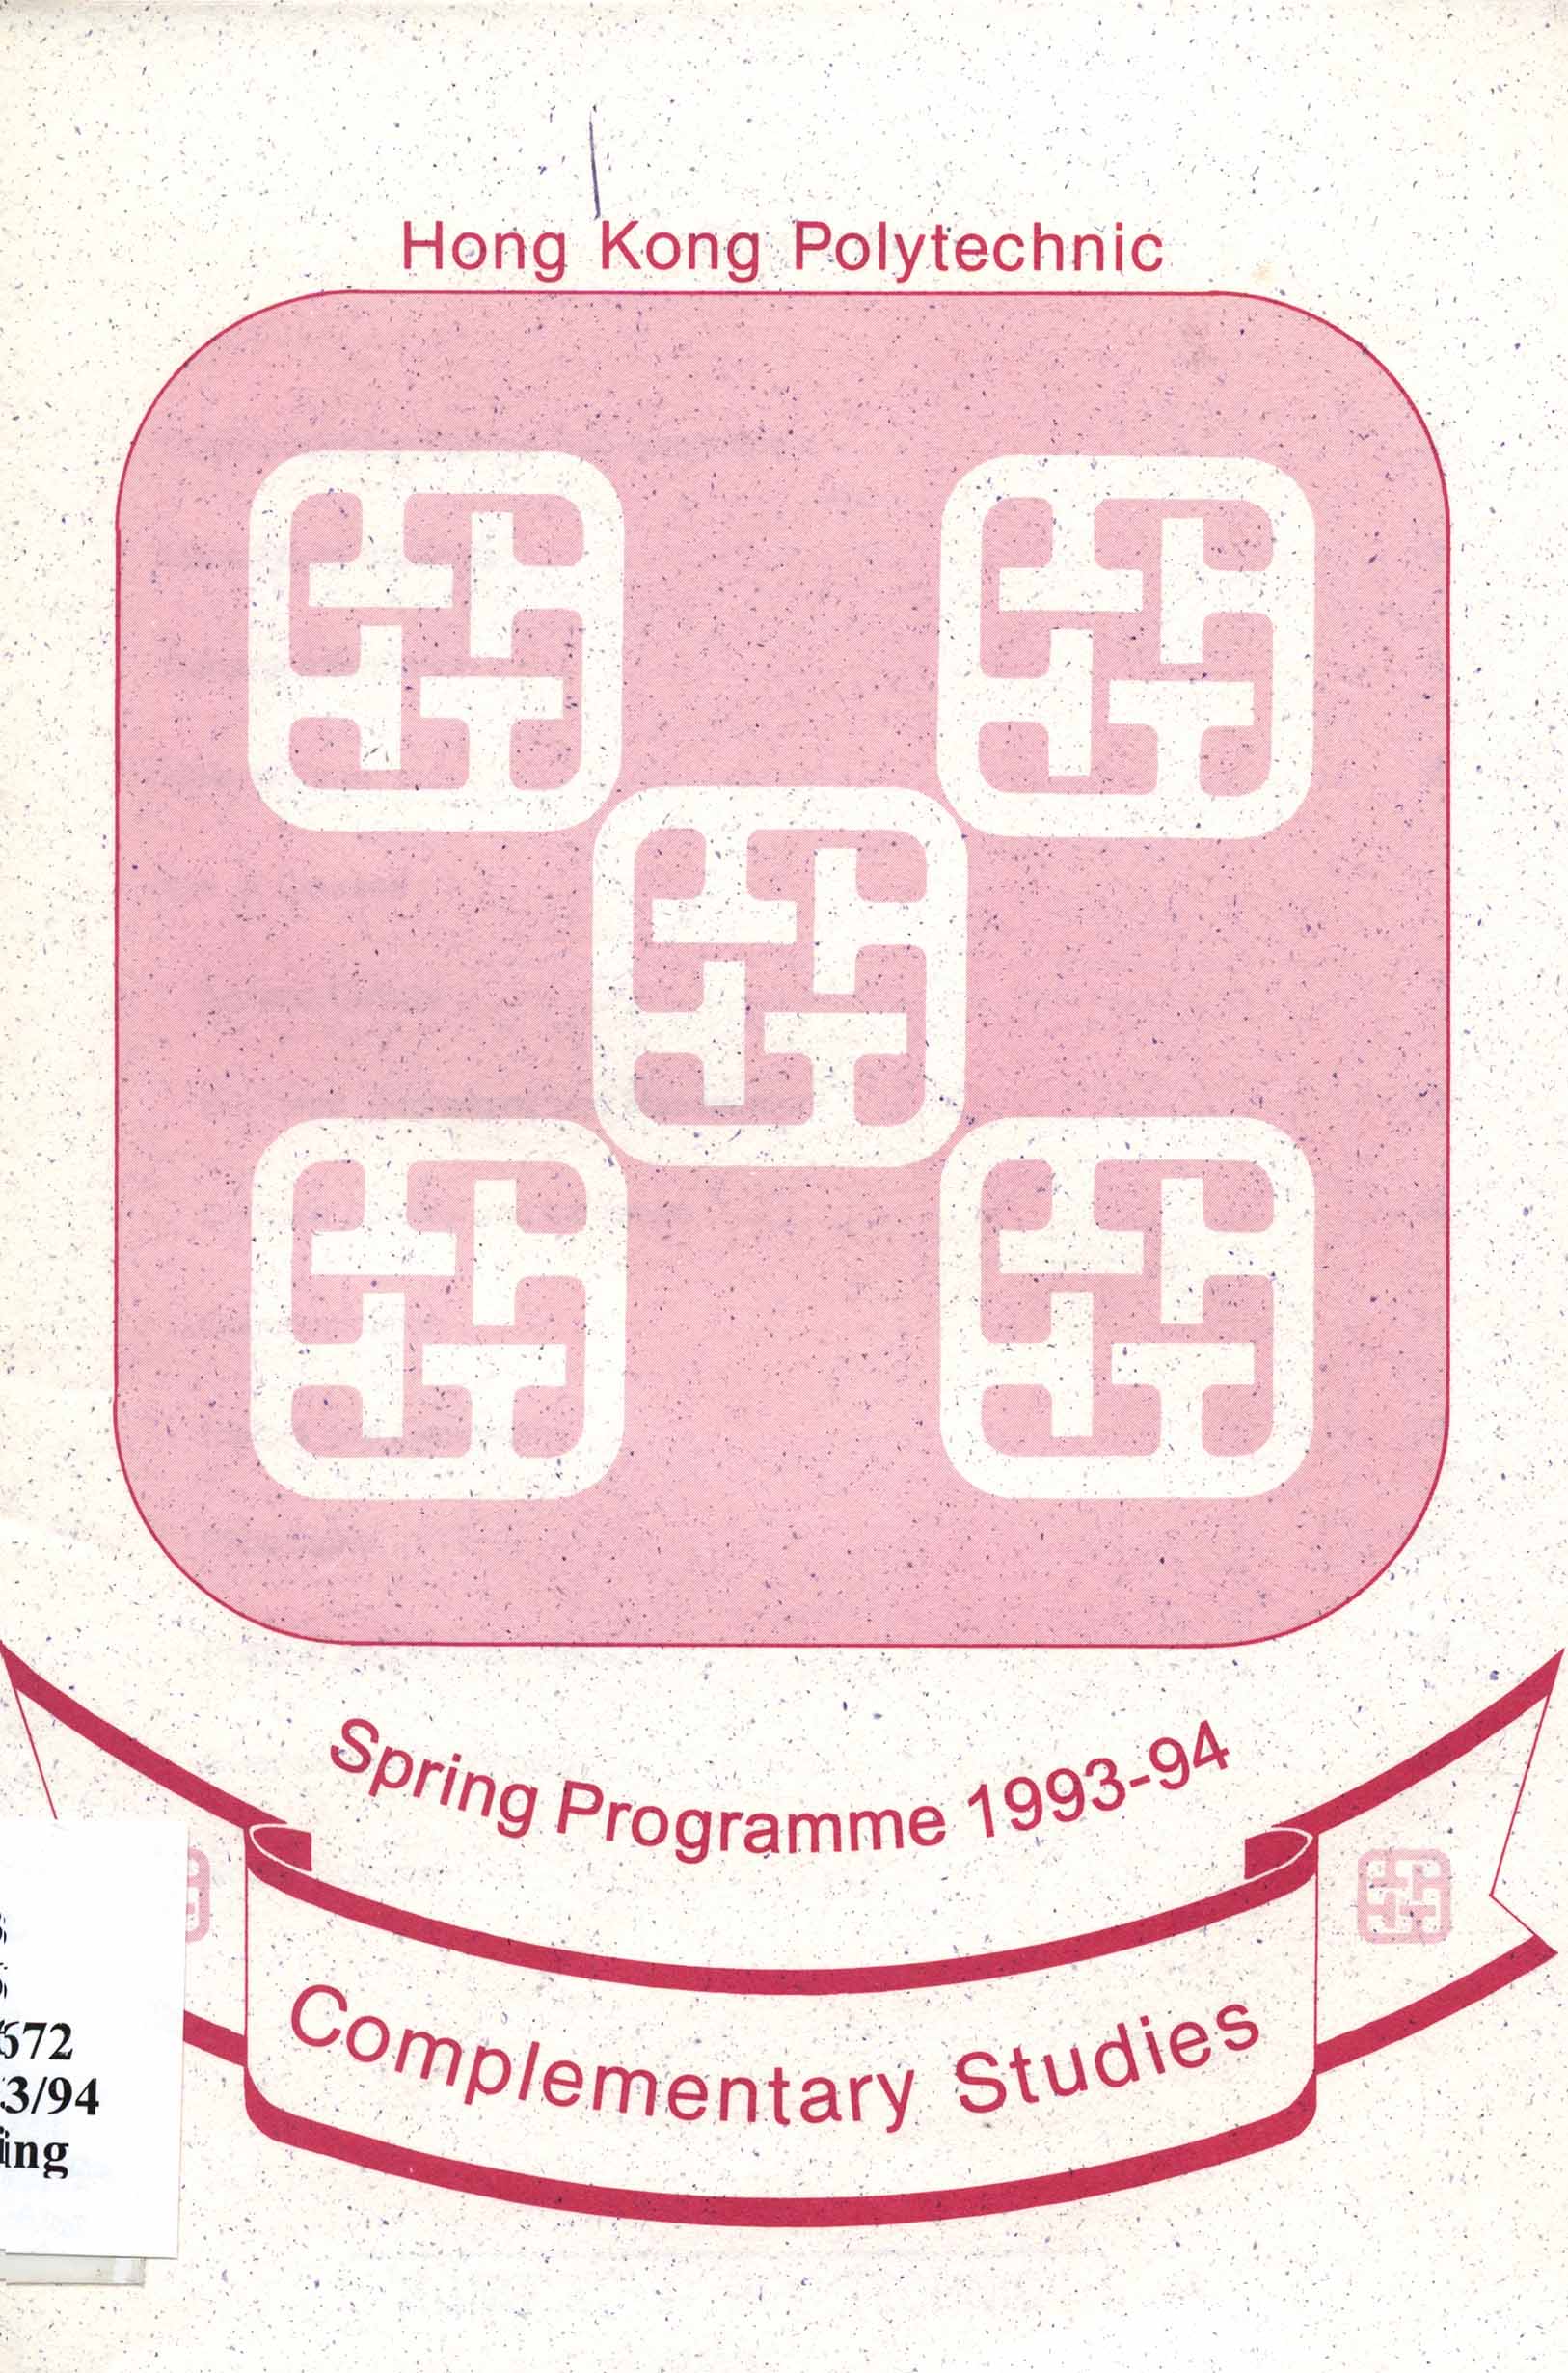 Complementary studies spring programme 1993-94